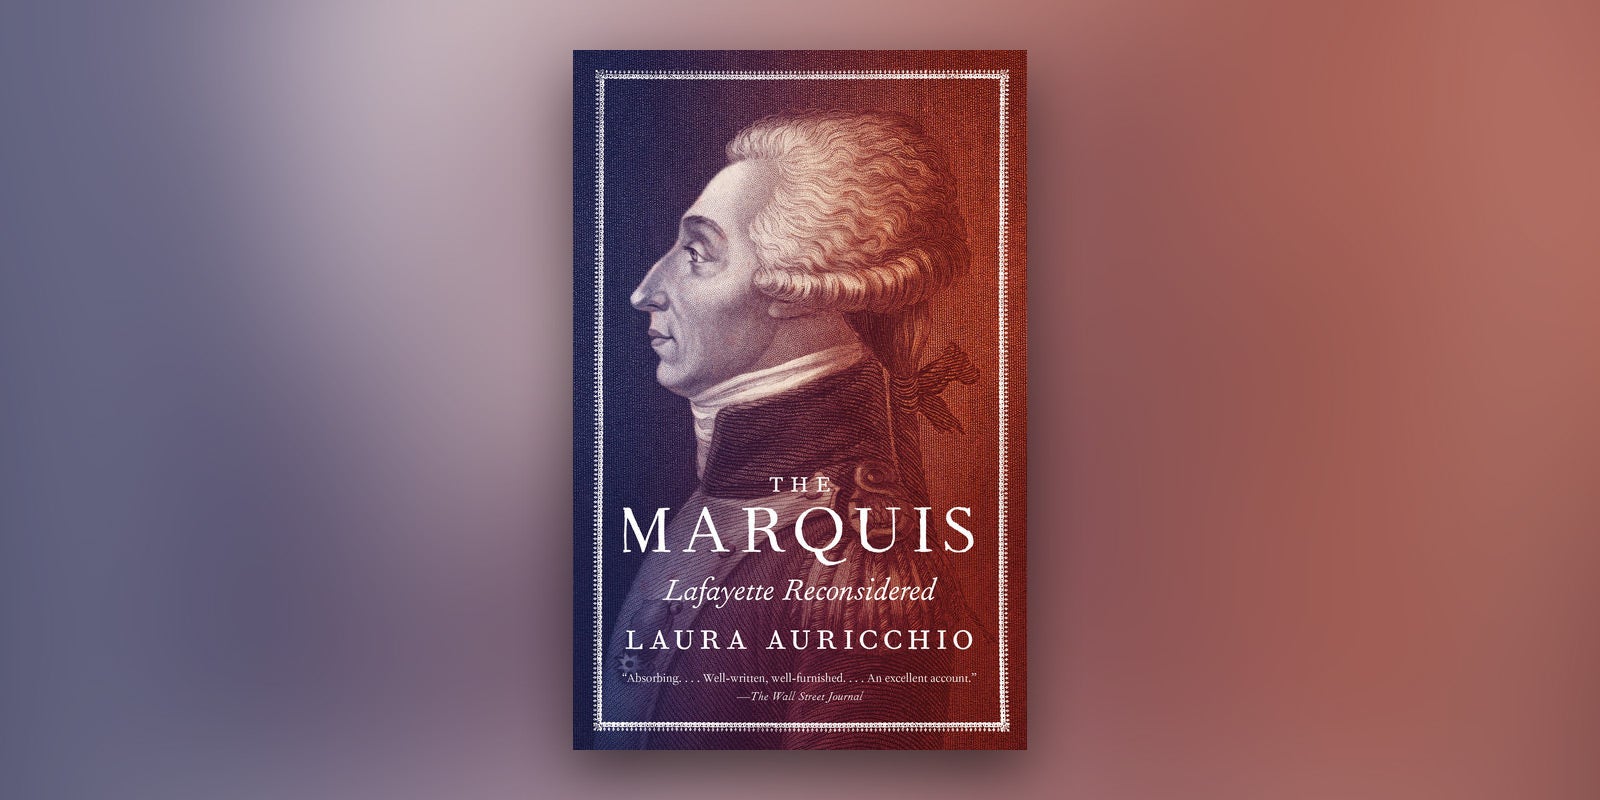 Laura Auricchio’s The Marquis Shortlisted for American Library in Paris Book Award